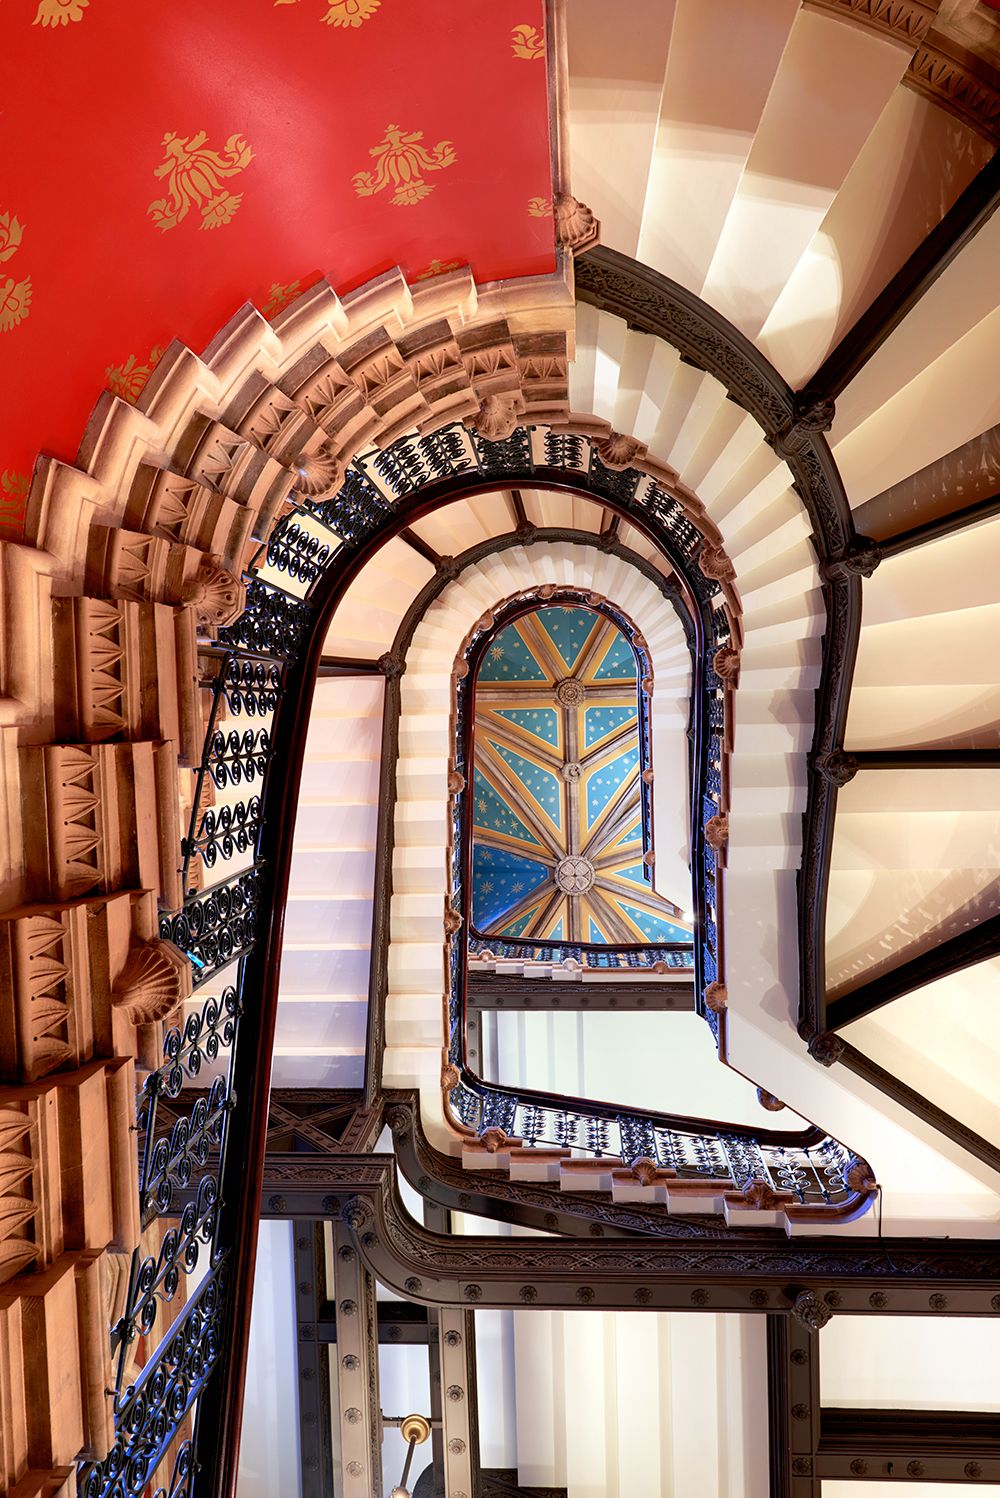 _St-Pancras-Renaissance-Hotel-LondonGrandStaircase_Copyright-Peter-Dazeley_Credit-photographer-Peter-Dazeley_cannot-be-used-without-written-permission-compressor